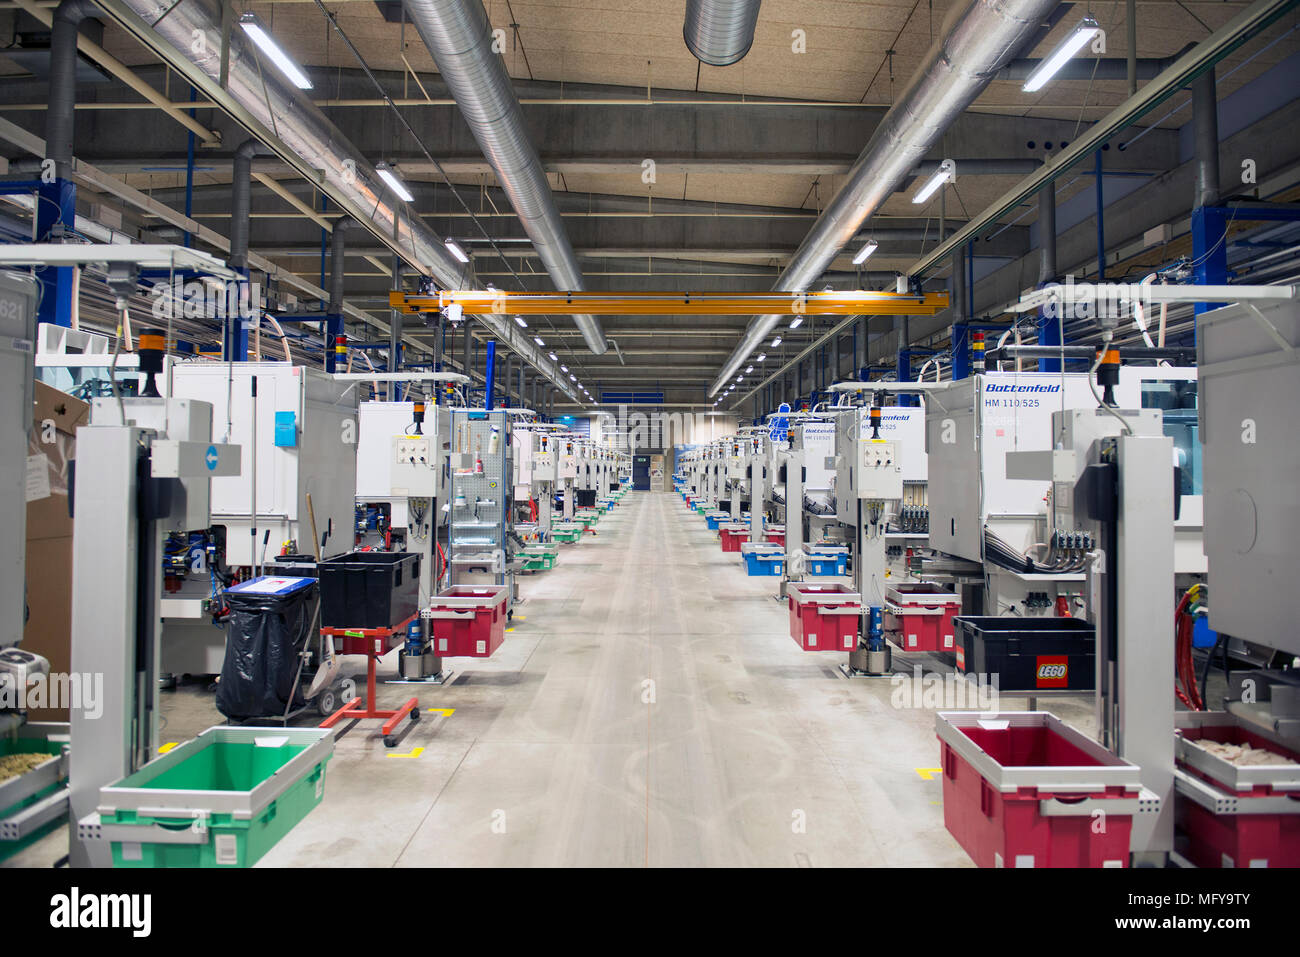 LEGO production factory in Billund Stock Photo